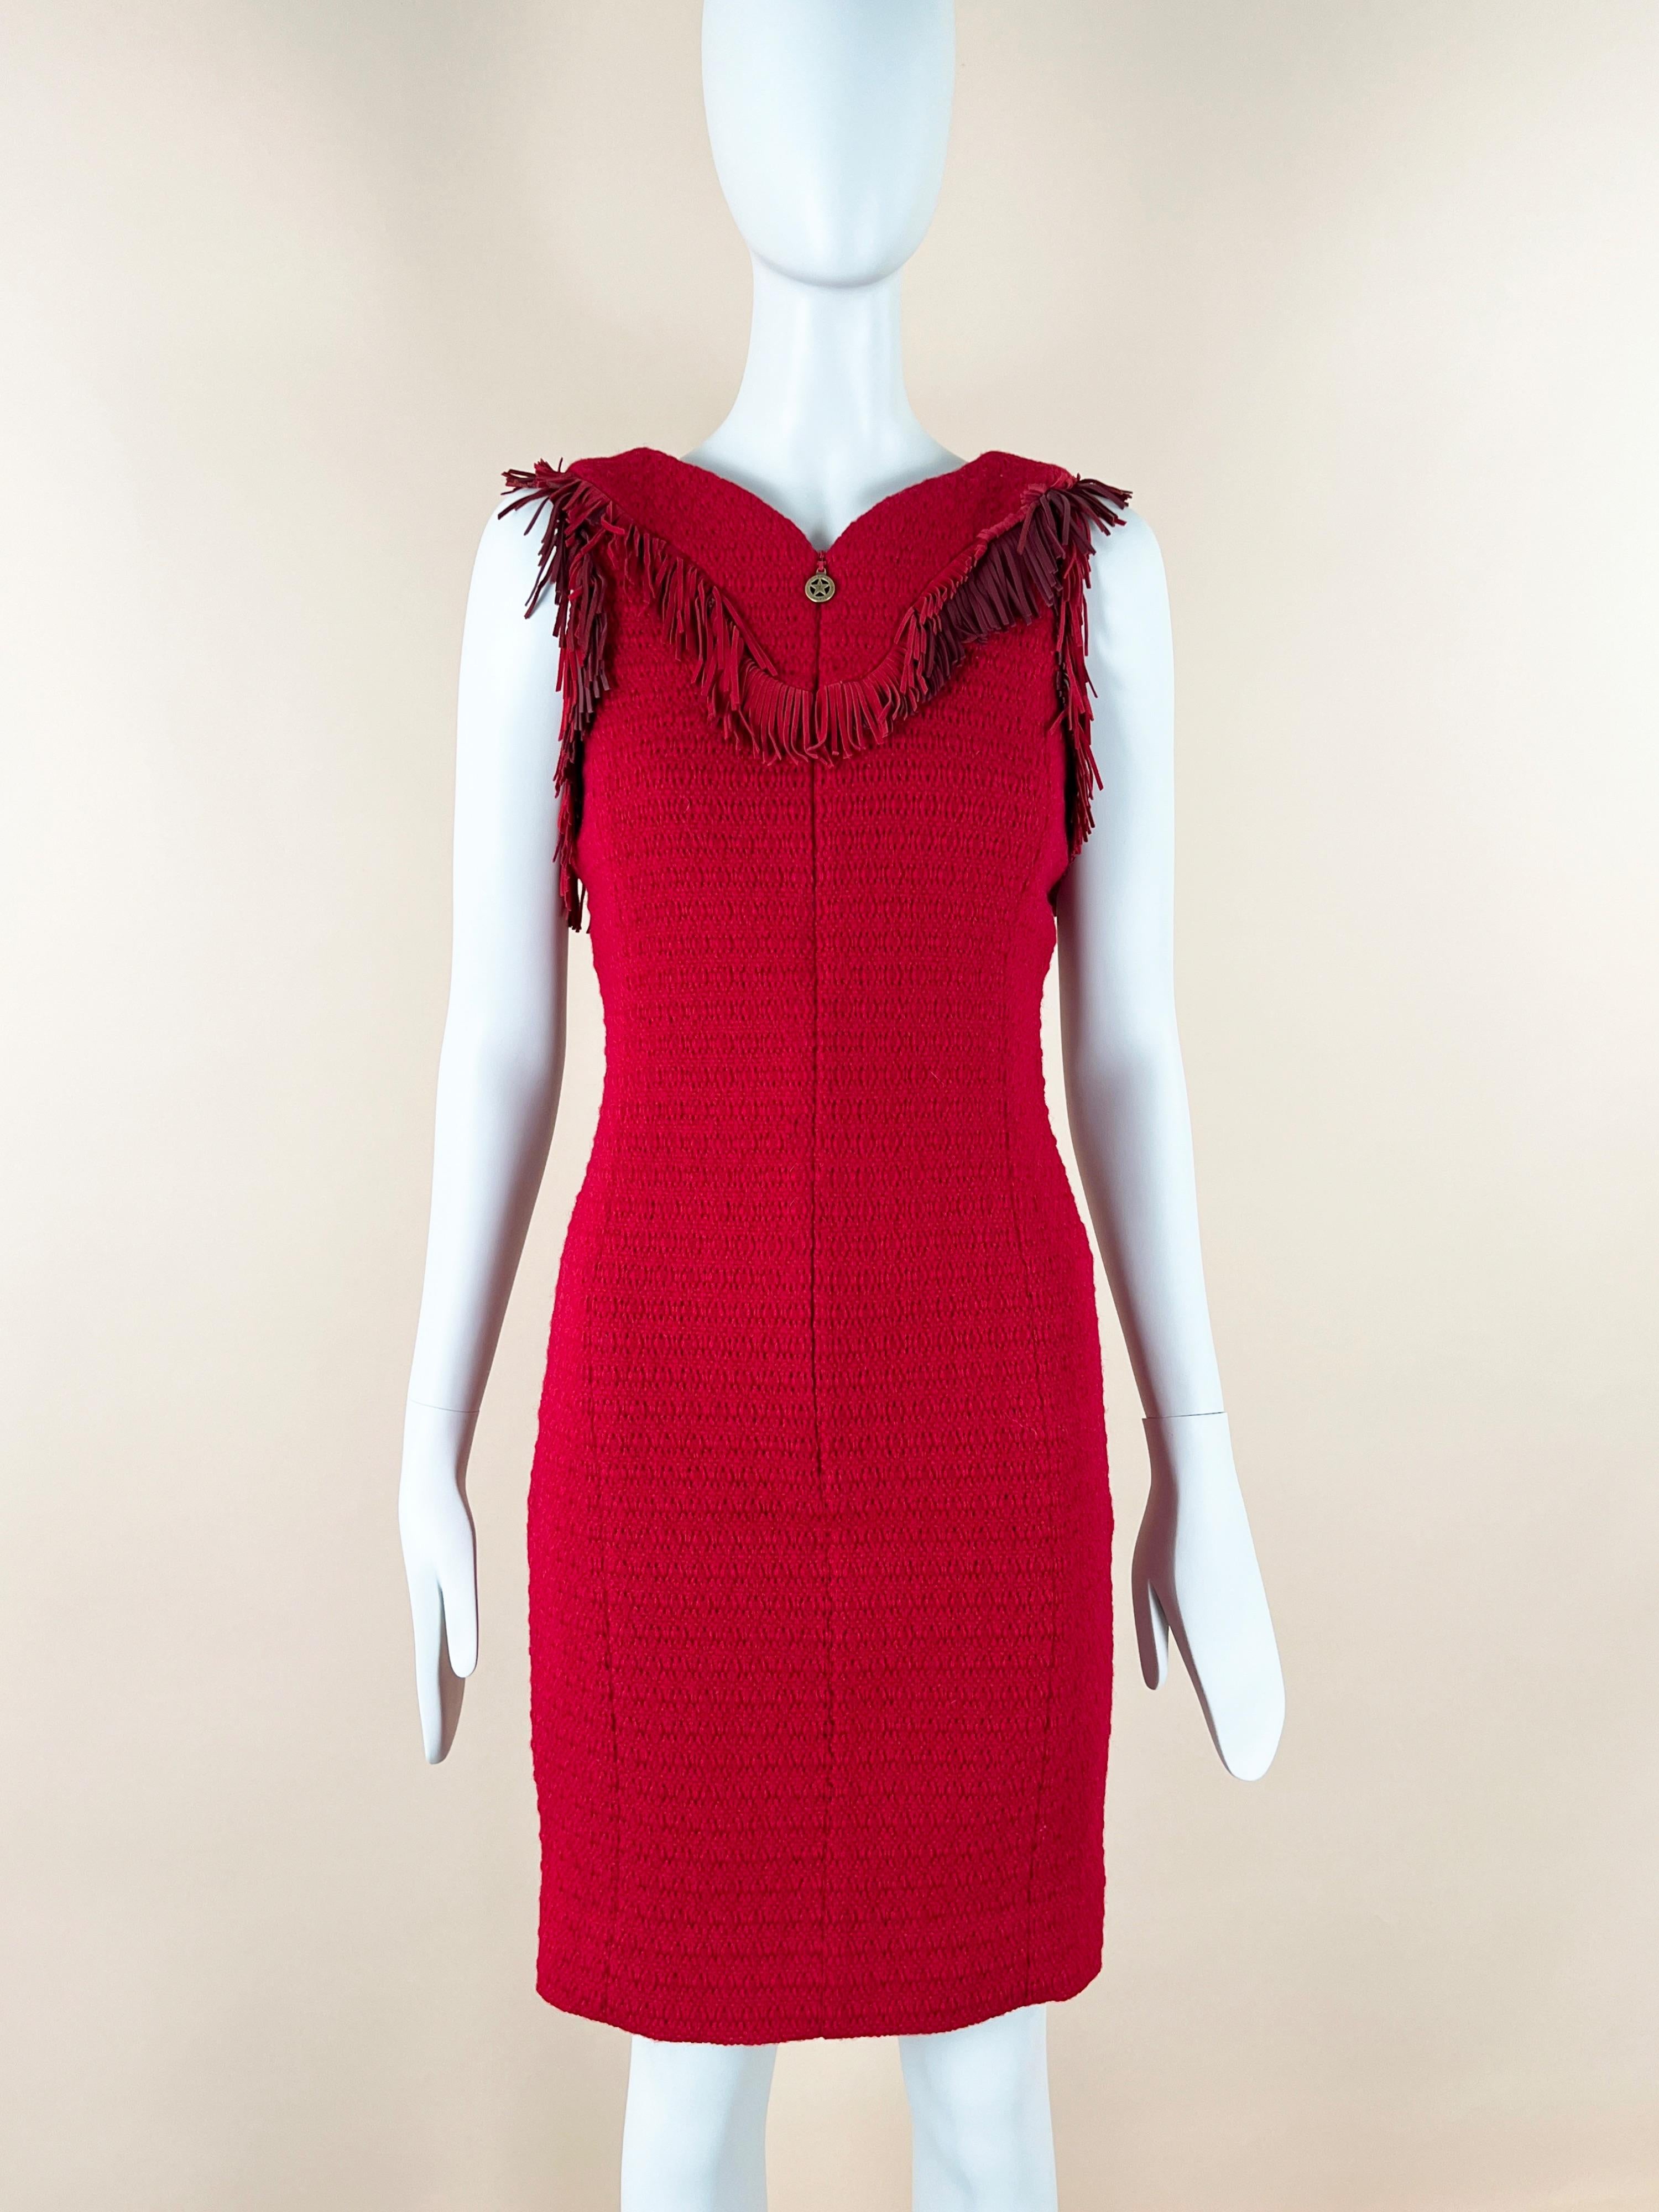 Chanel New Dallas Collection Runway Tweed Dress 2